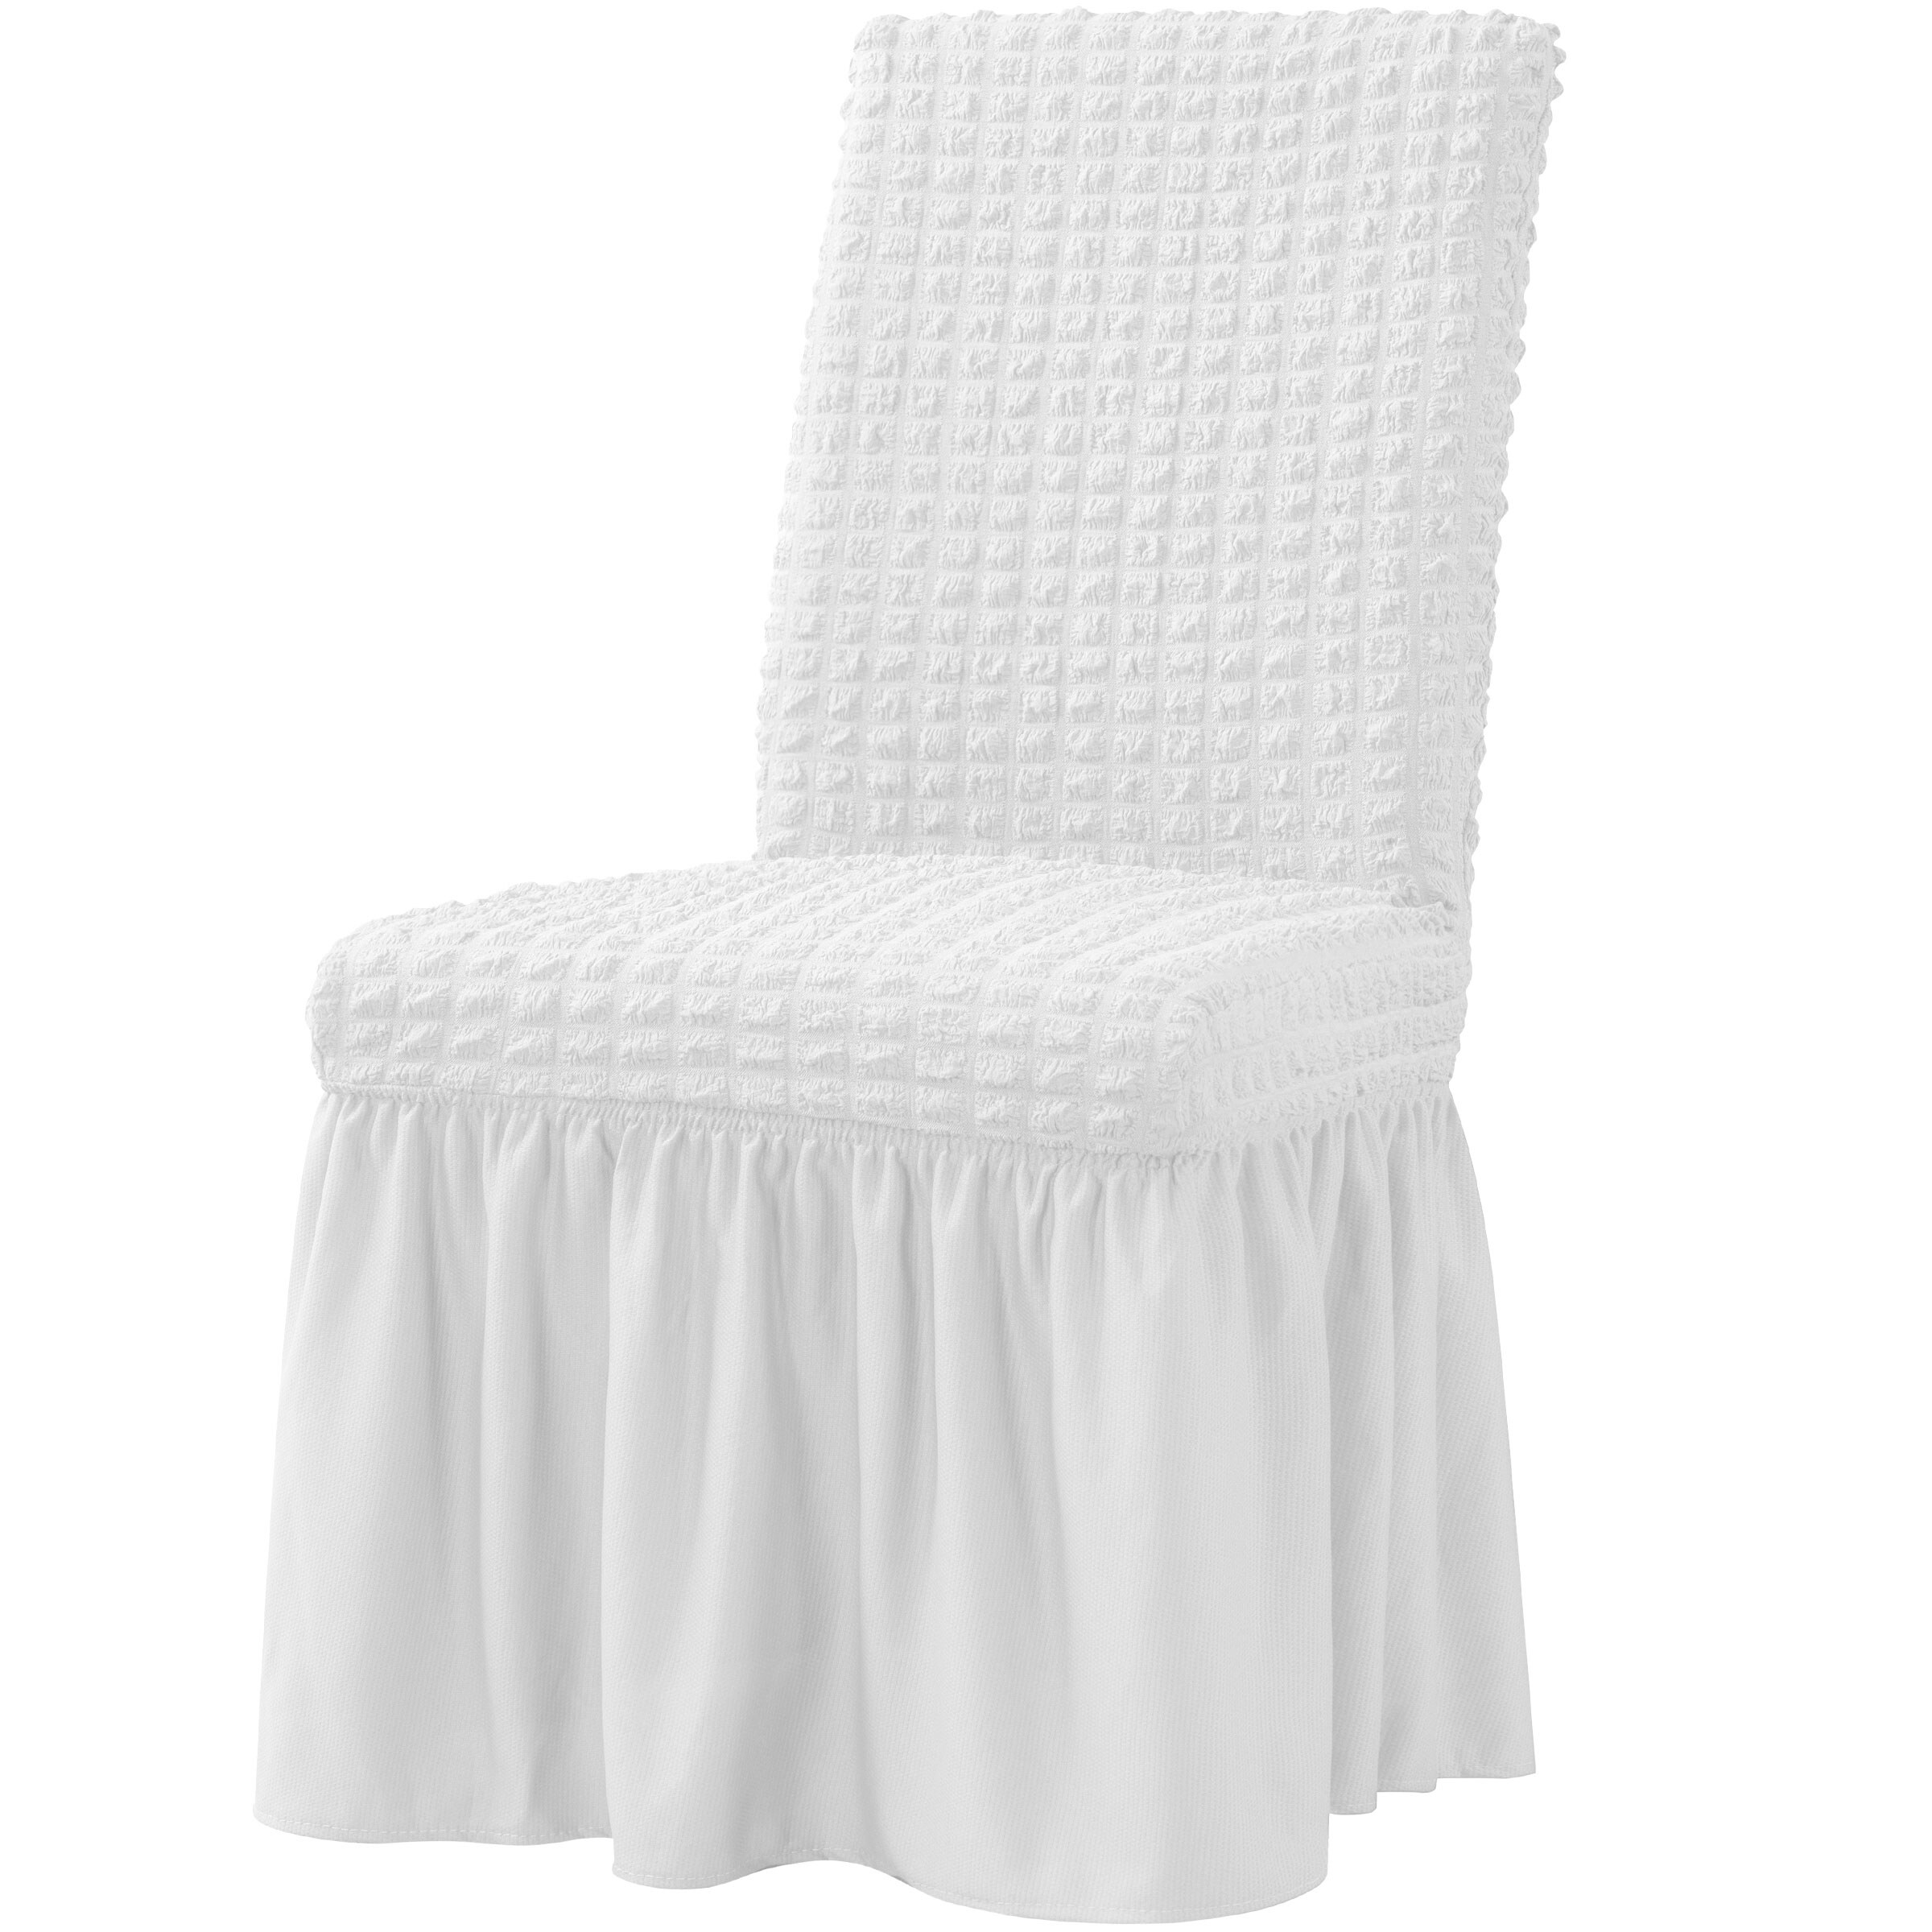 Chair Cover Dining Chair Slipcover Ruffled Skirt Chair Protector Soild Color 